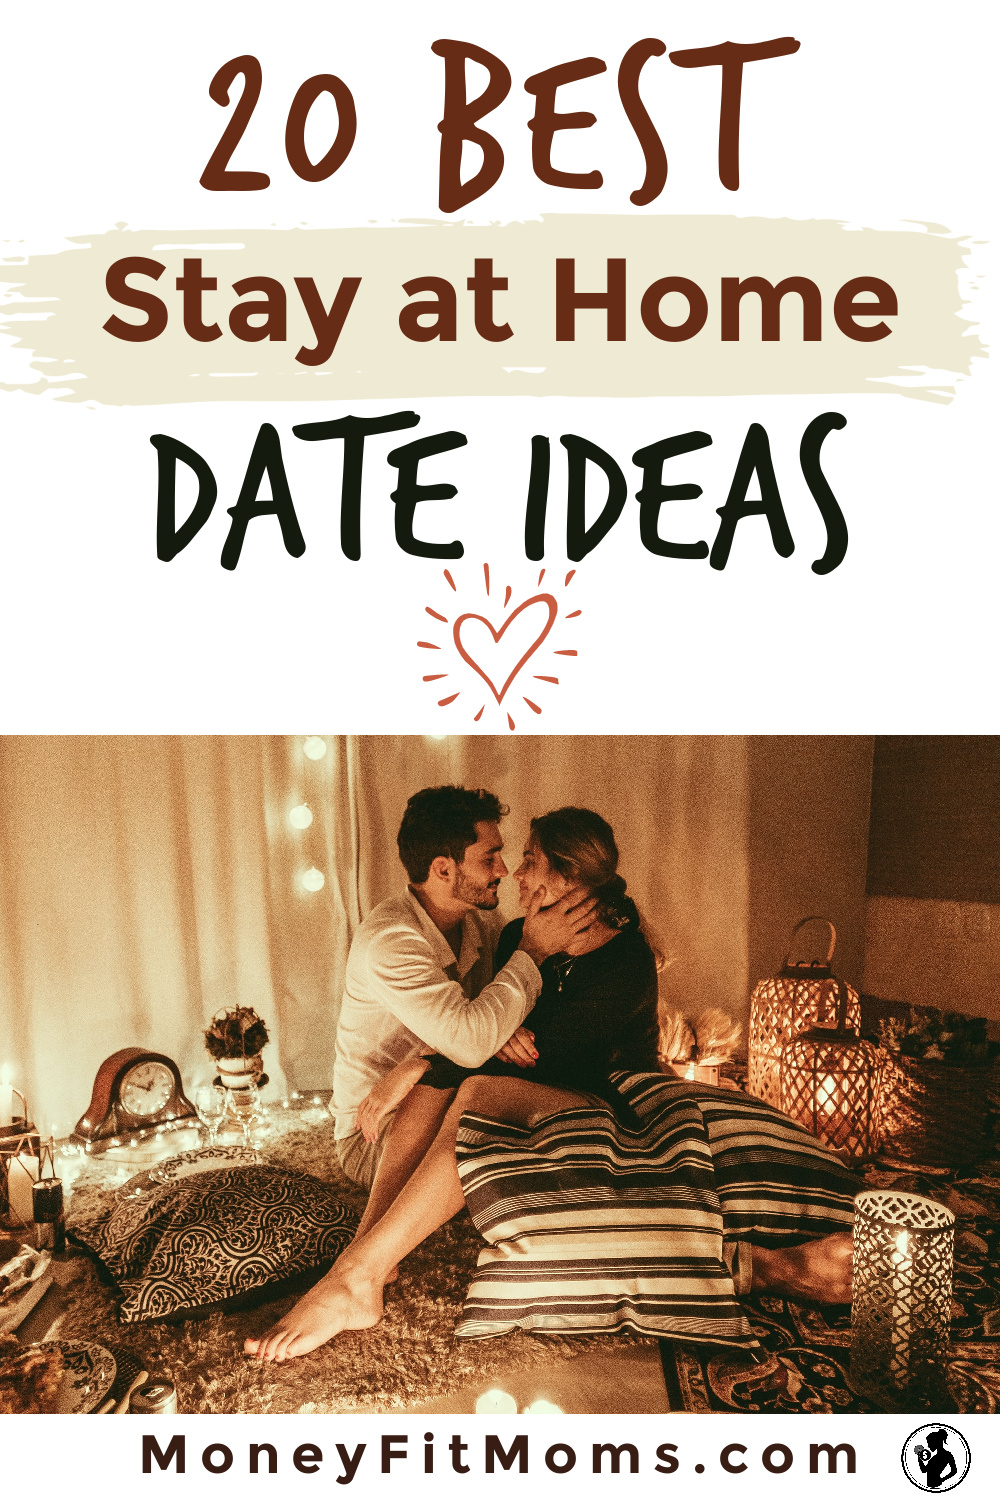 TOP 20 Stay At Home DATE IDEAS! 🔥 (Body Paint Ideas, etc.)